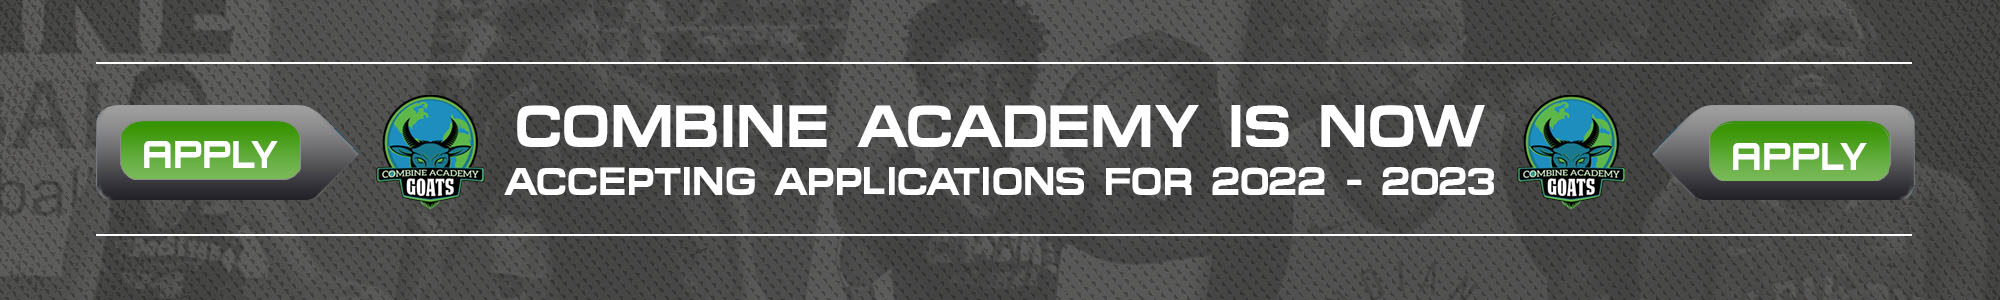 Combine Academy Accepting Application Banner